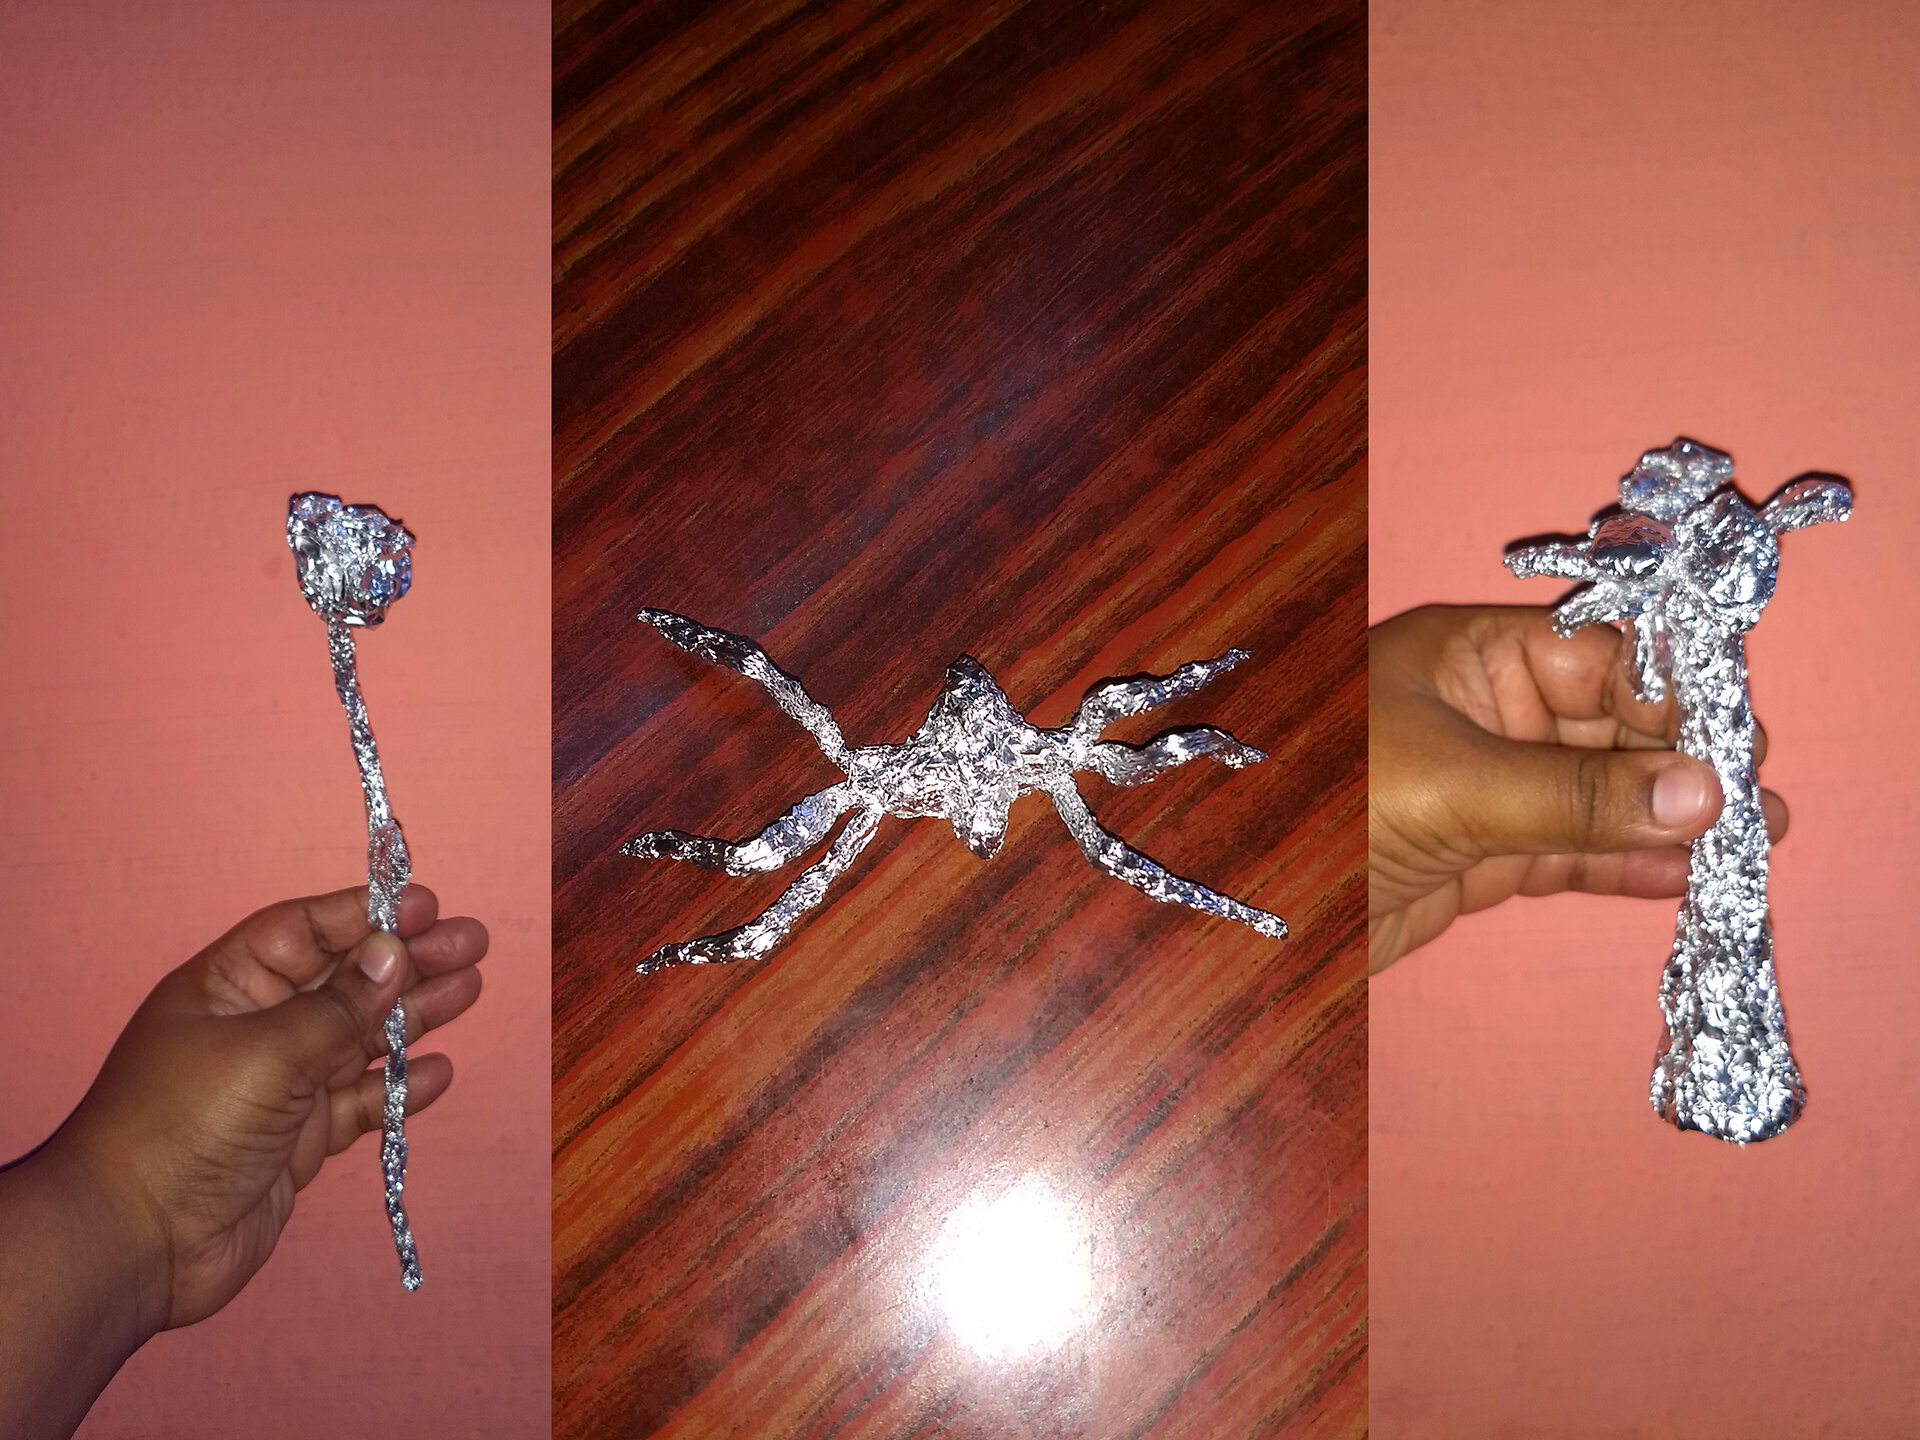 Tin Foil Rose, Spider and Palm Tree